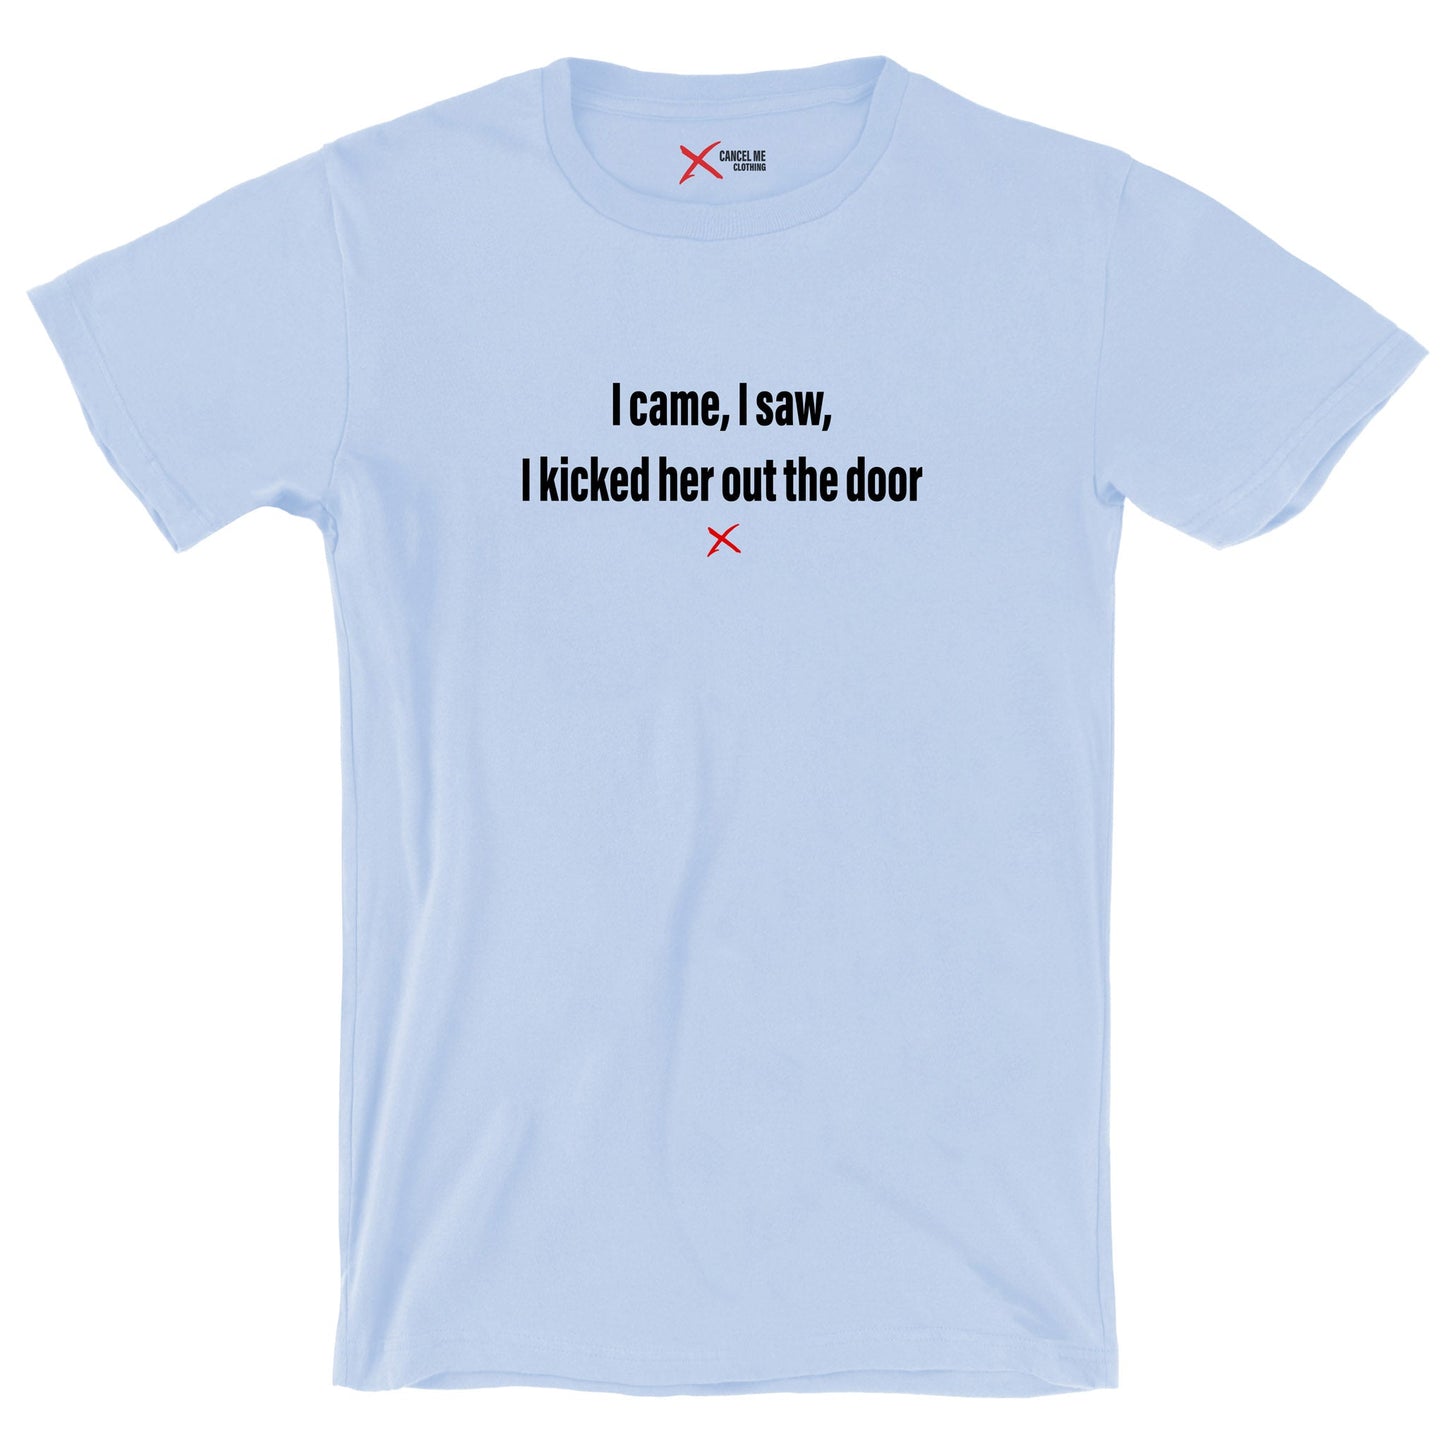 I came, I saw, I kicked her out the door - Shirt